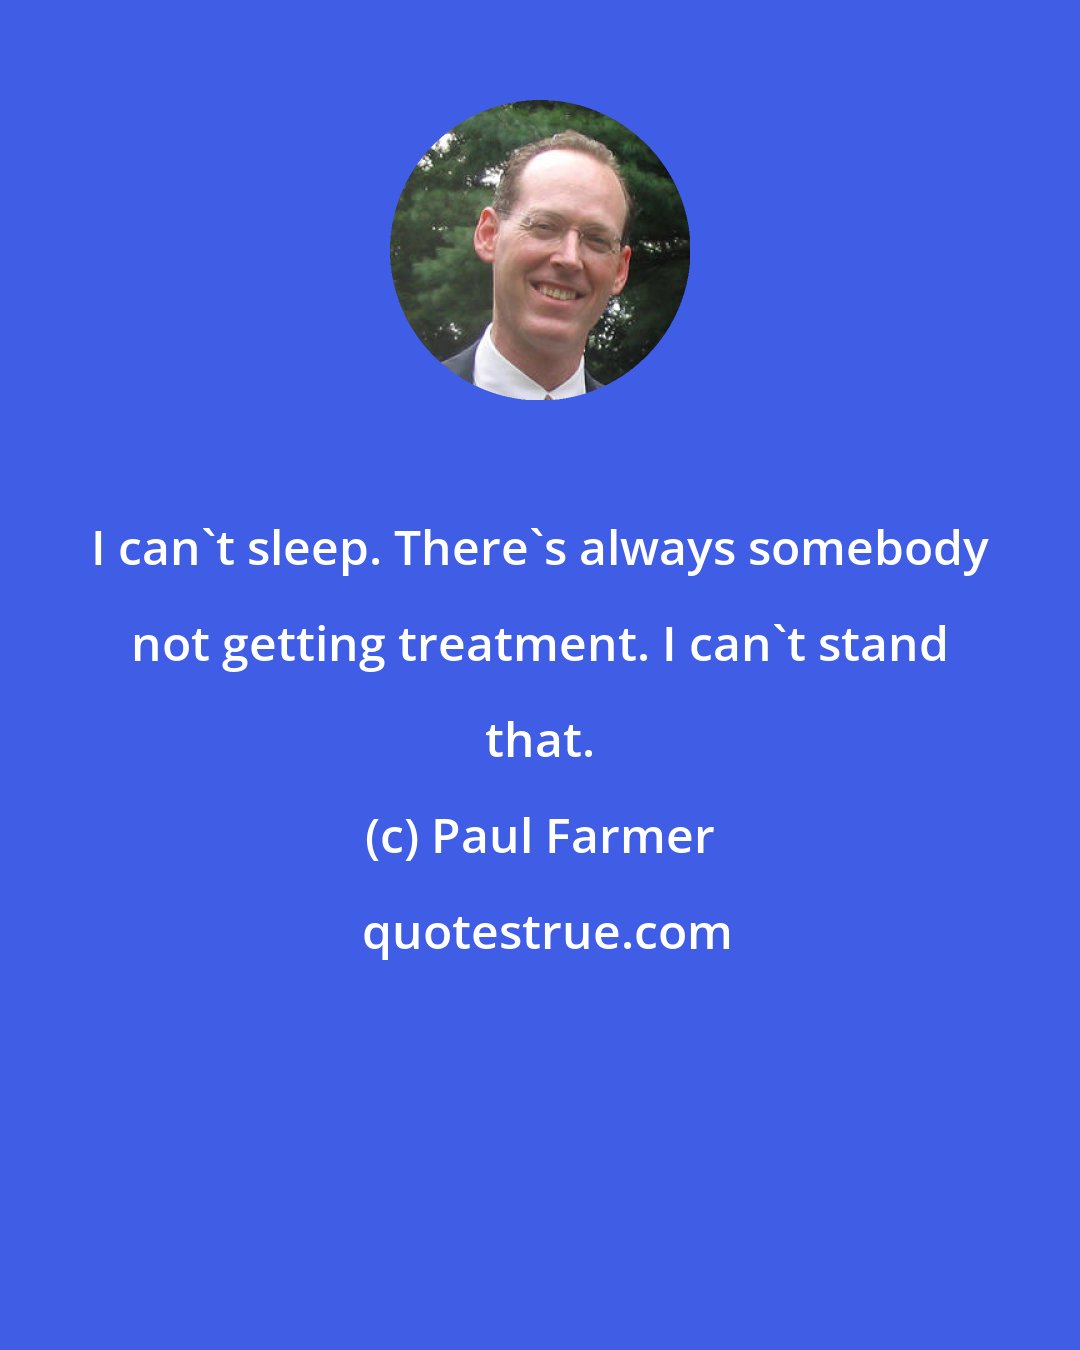 Paul Farmer: I can't sleep. There's always somebody not getting treatment. I can't stand that.